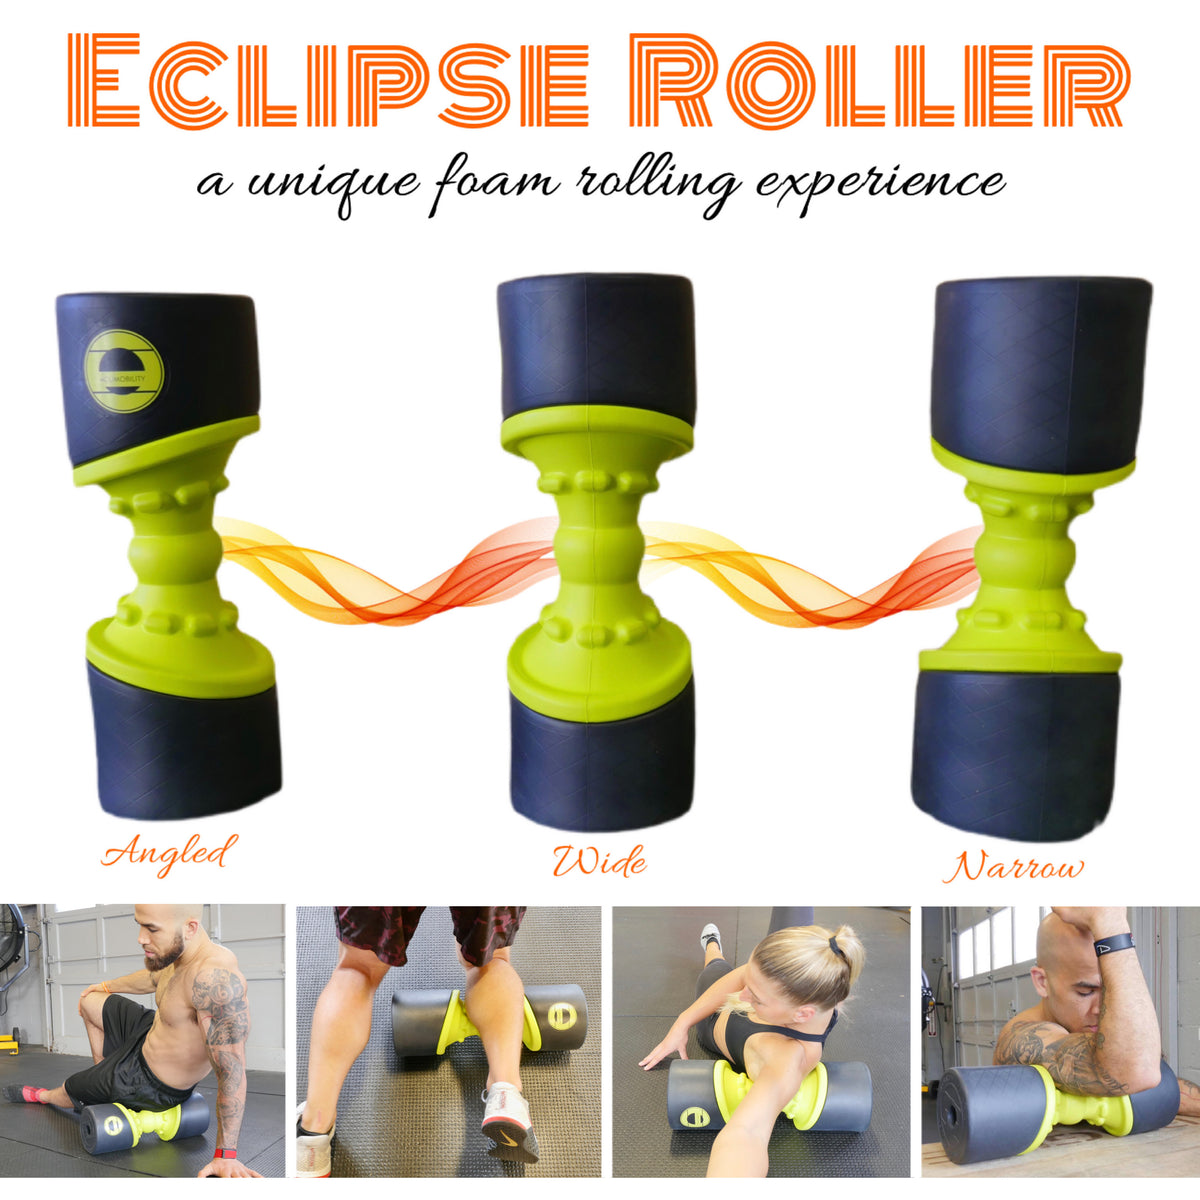 Wholesale - Eclipse Foam Roller - Increments of 2